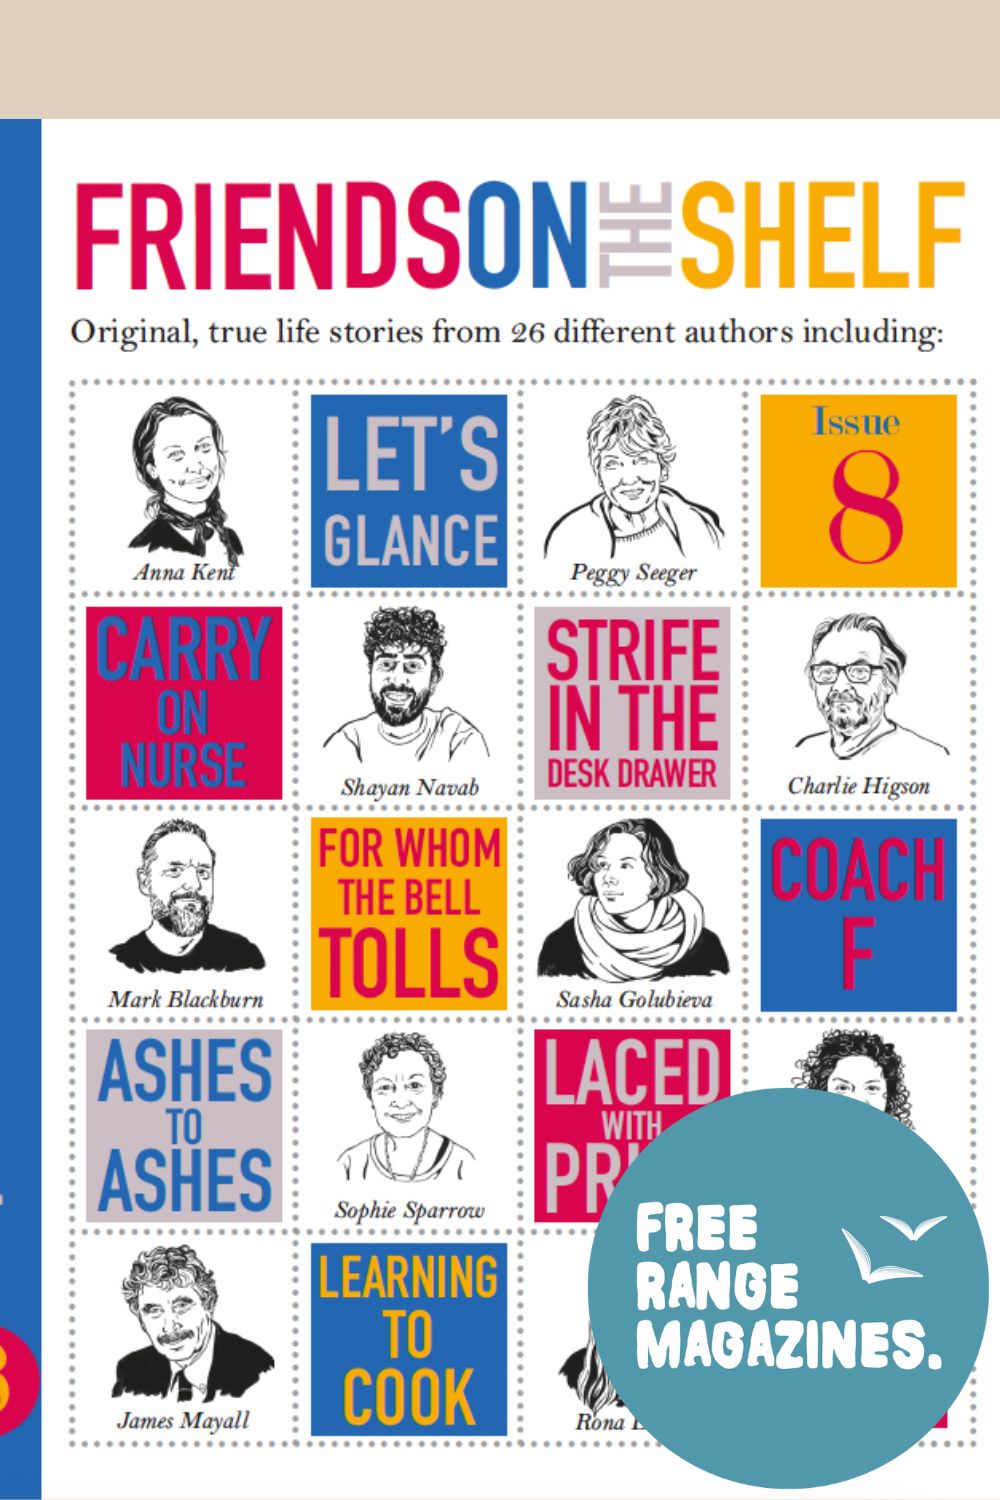 Friends on the Shelf magazine cover - issue 8